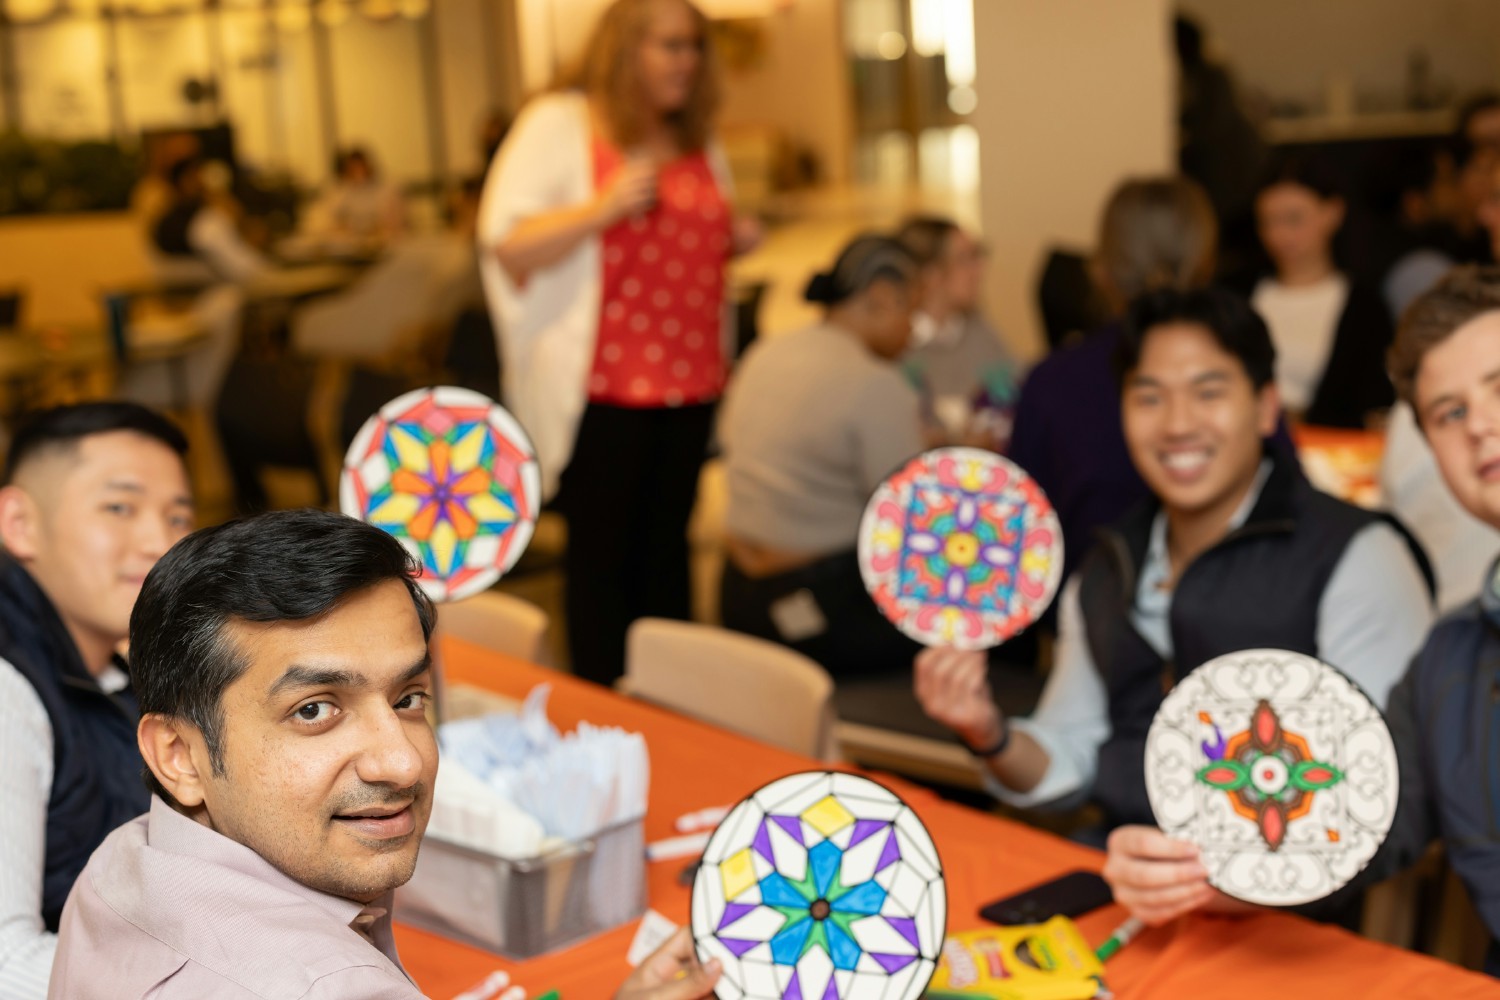 Our Diwali celebration was complete with rangoli, magnolias, traditional Indian food, music and more.